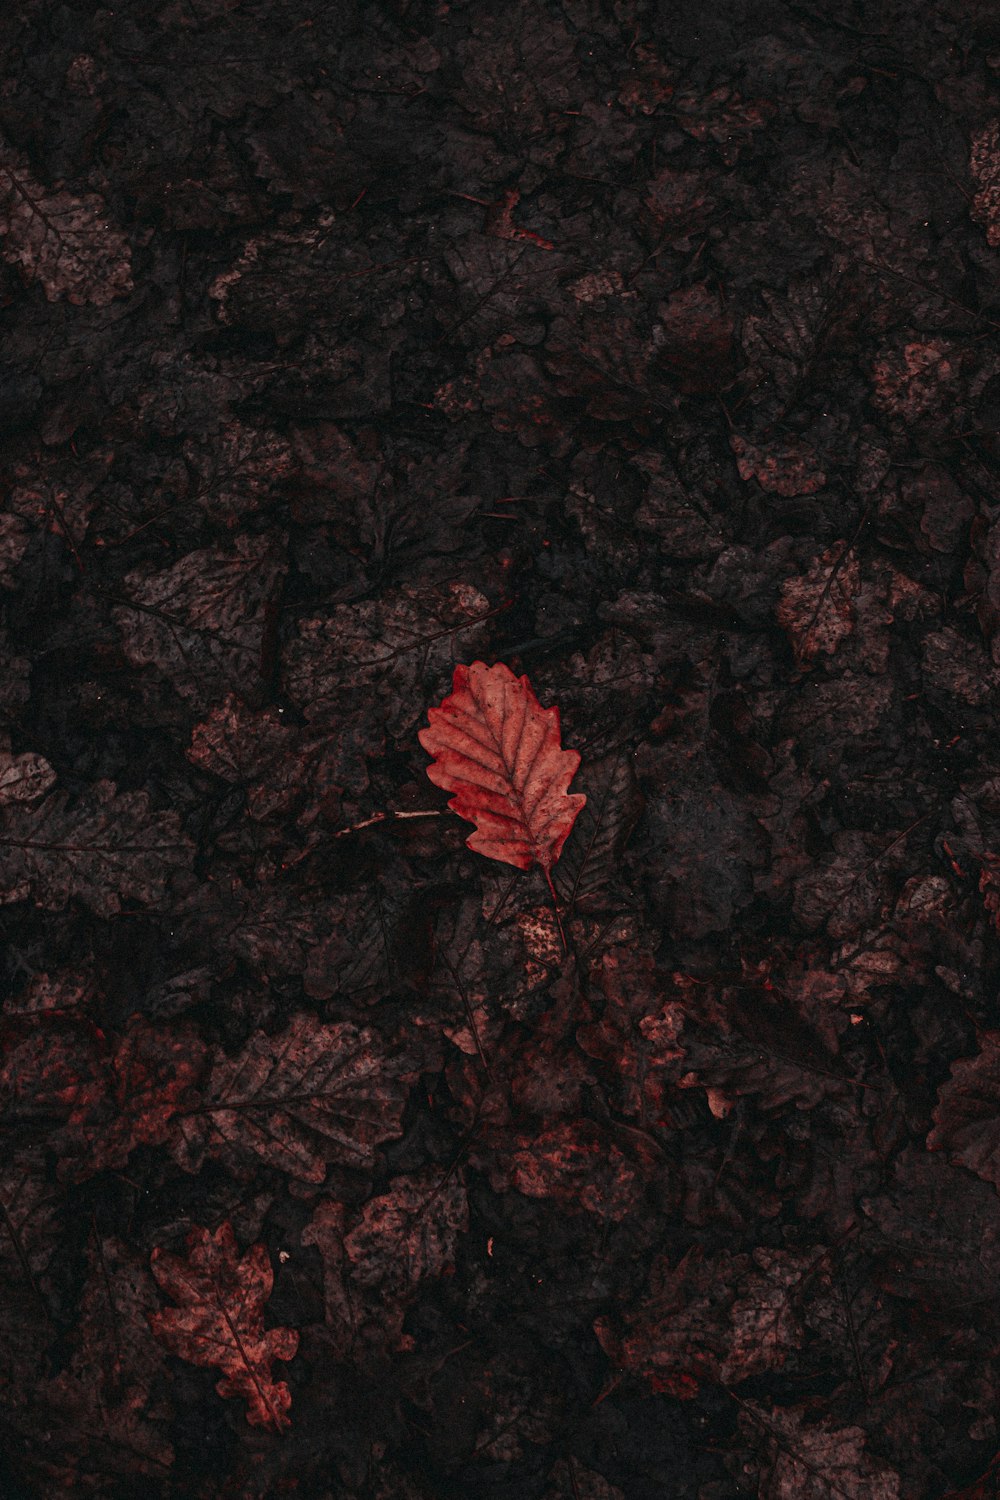 red and brown maple leaves